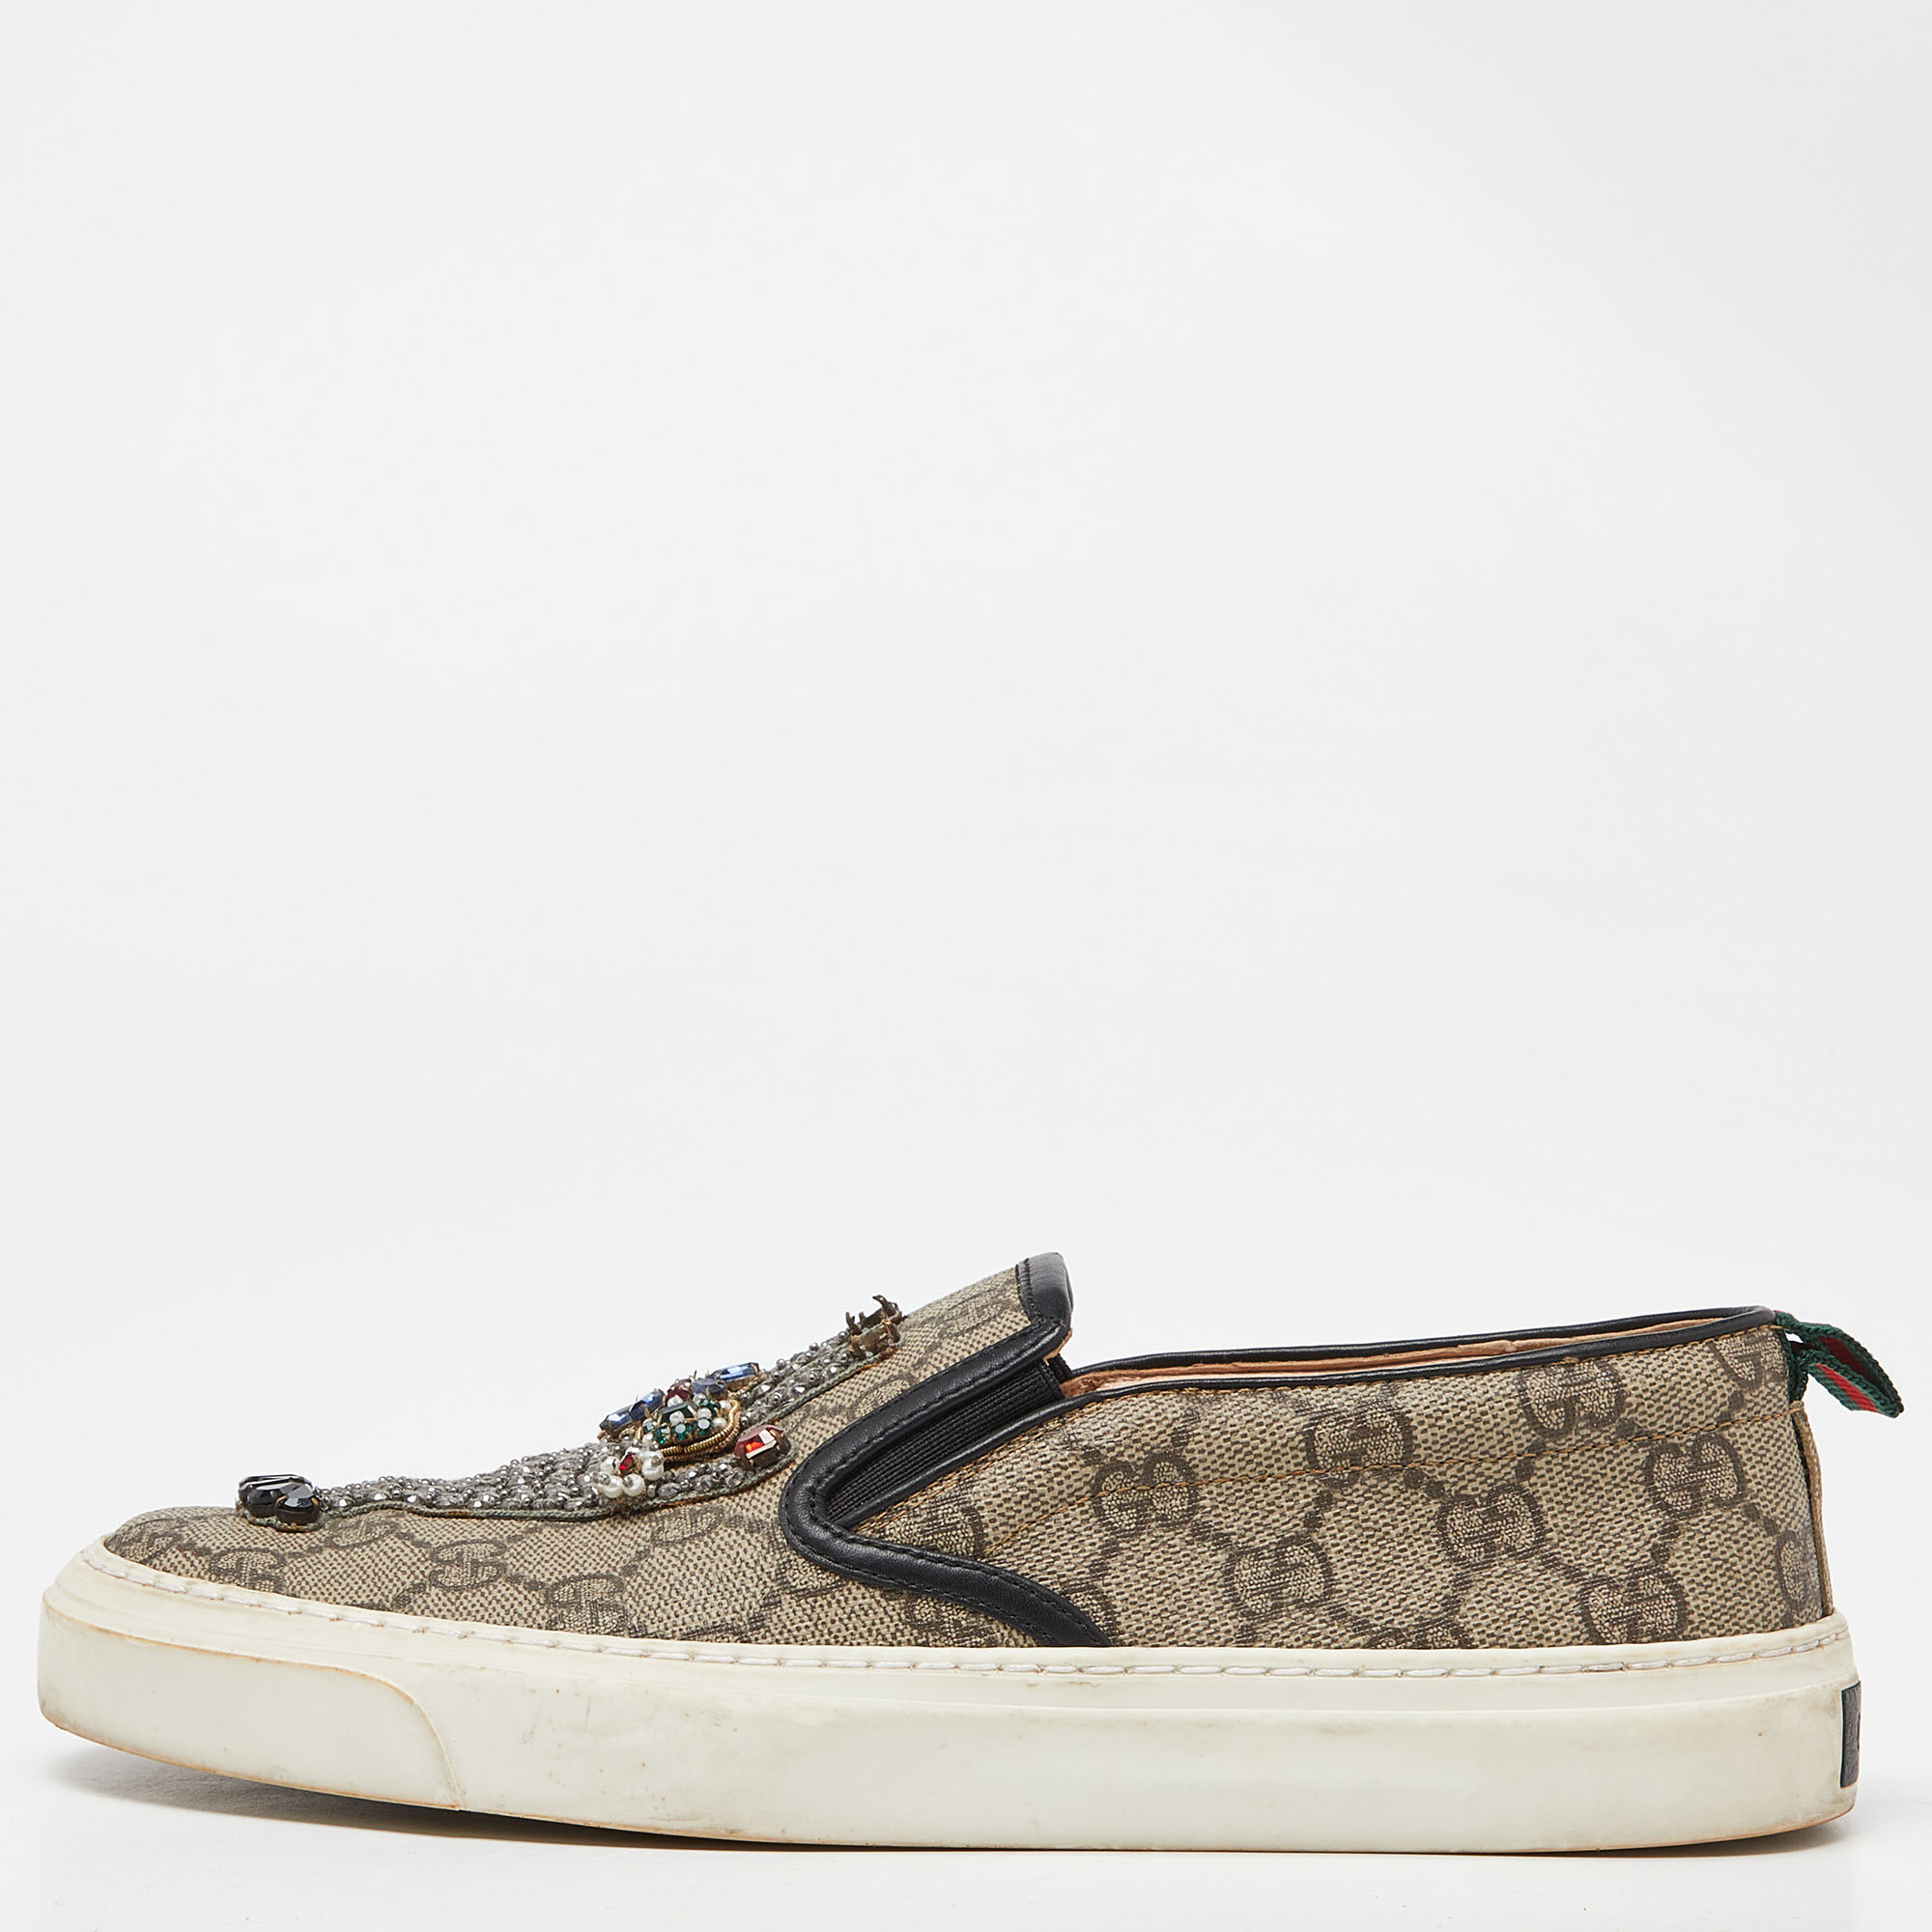 Gucci beige gg supreme canvas and leather slip on sneakers size 37